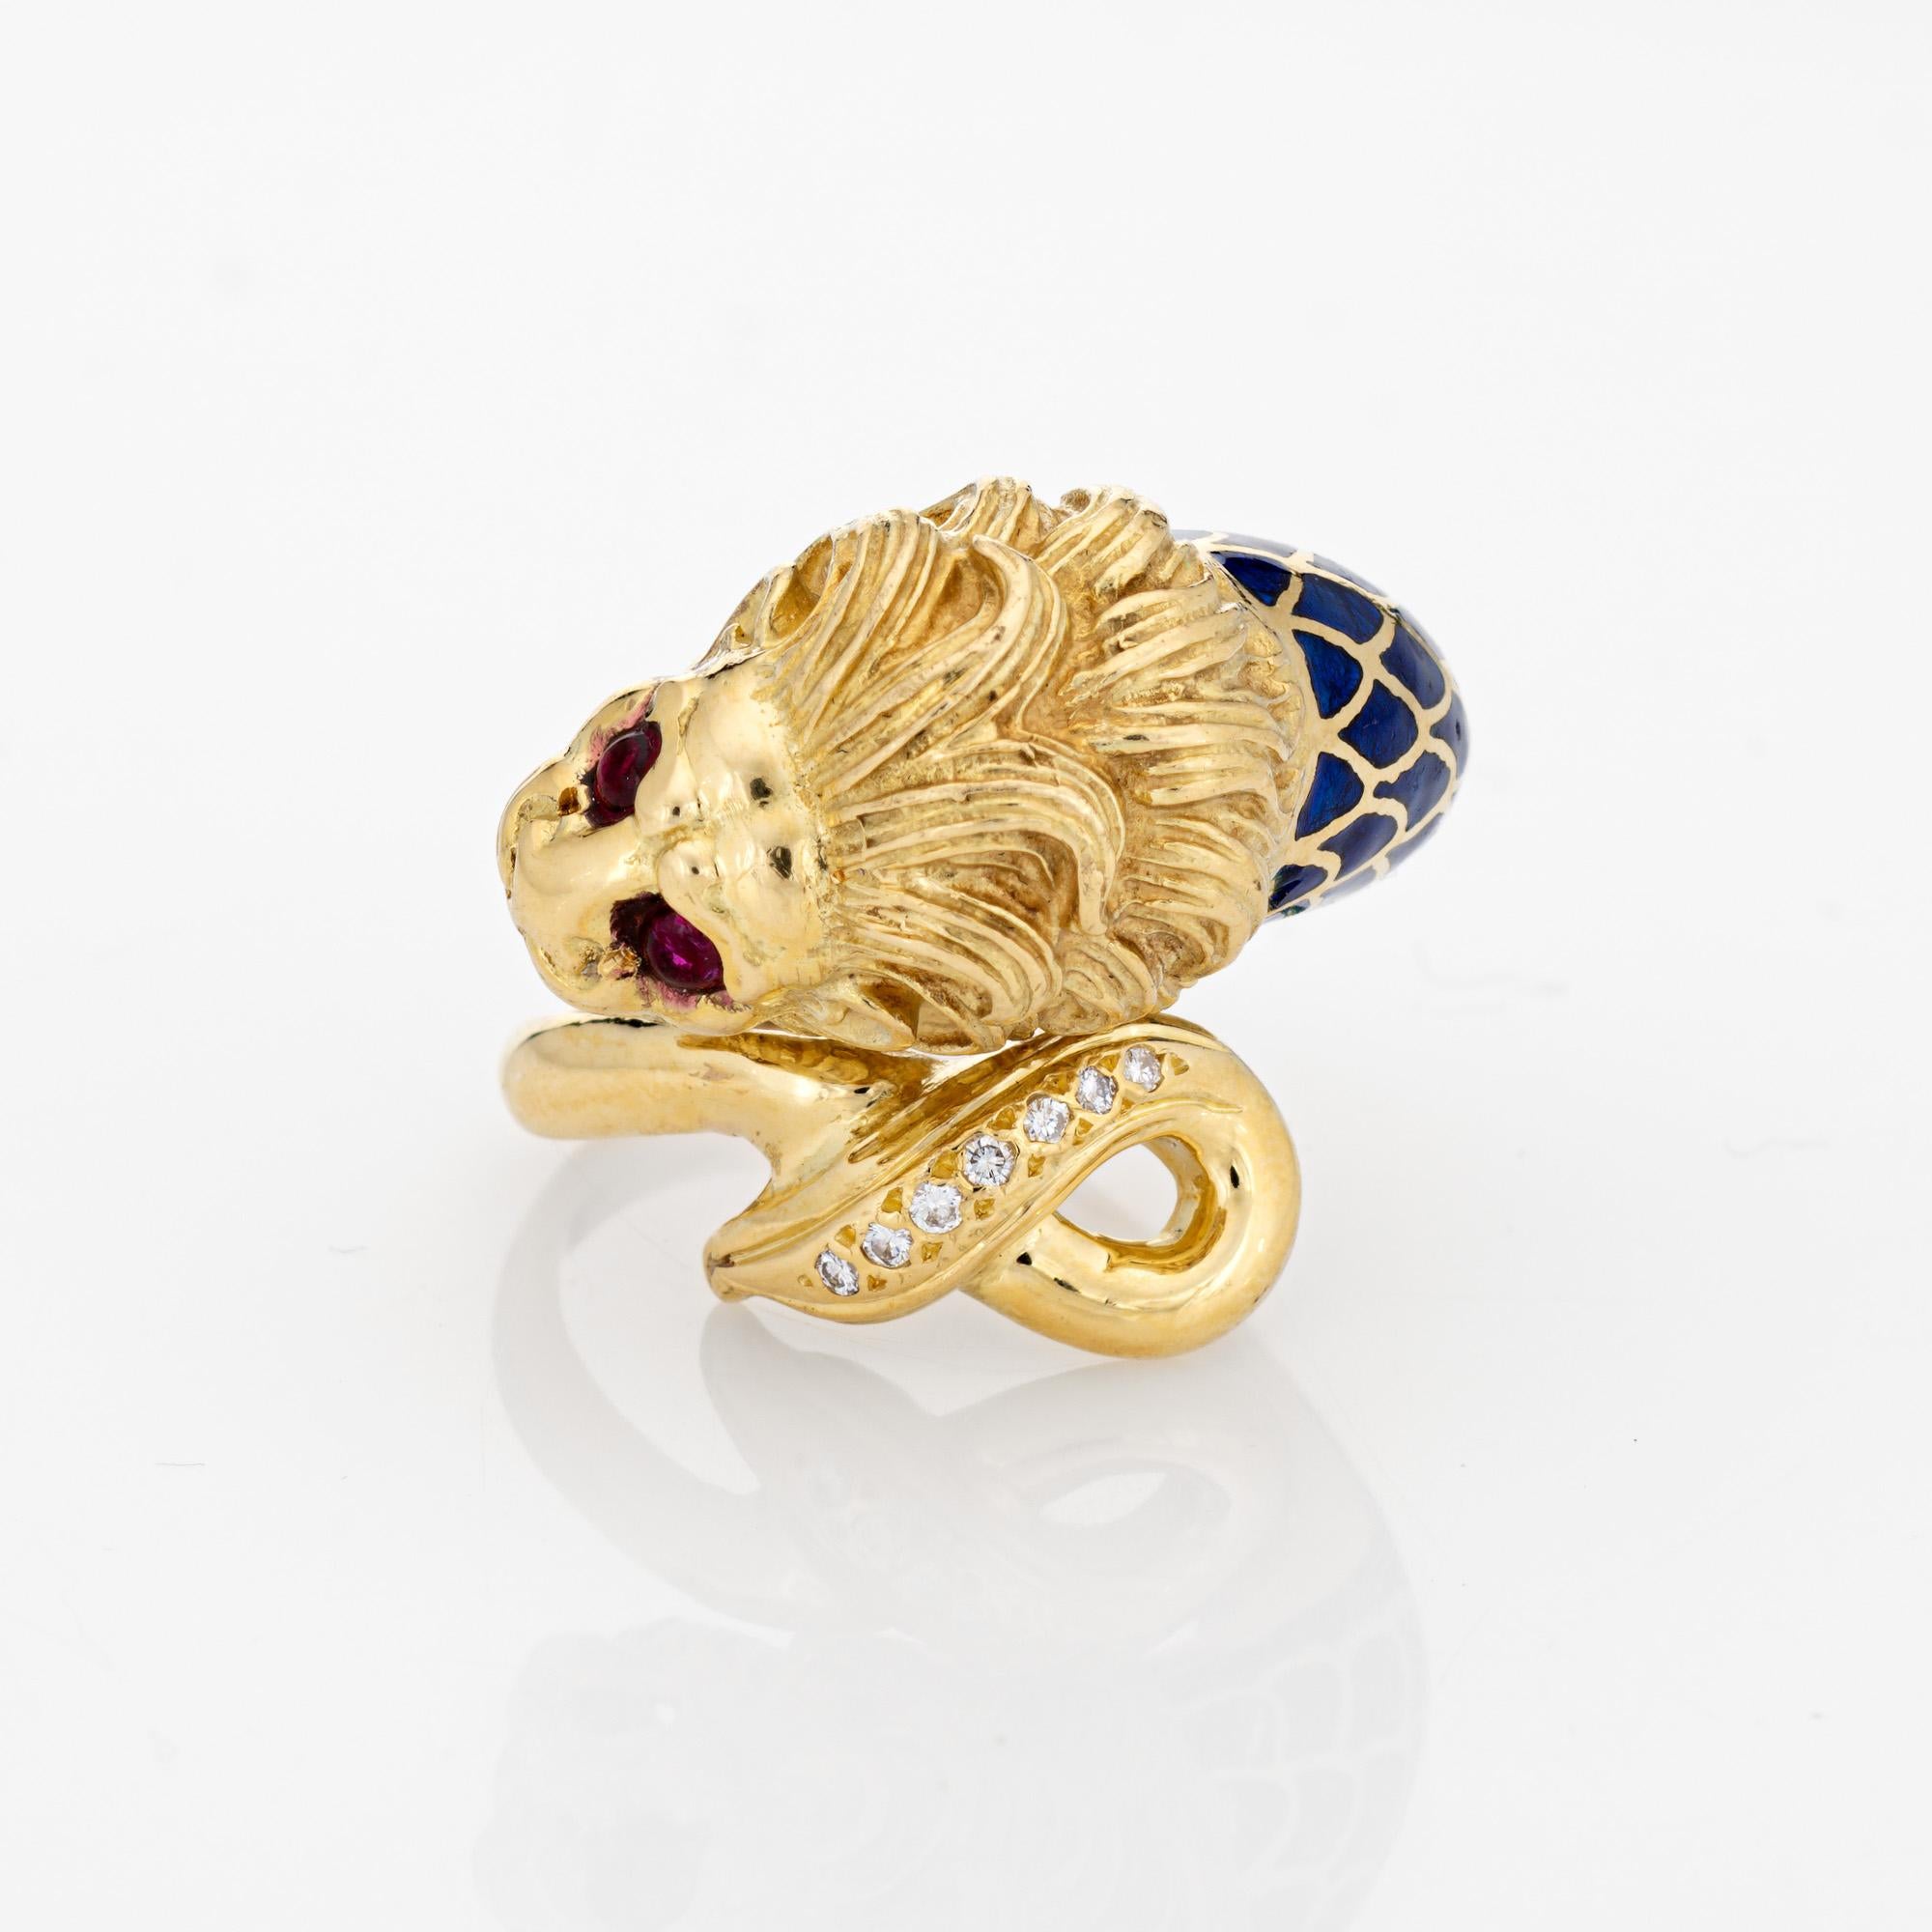 Large Lion Ring Sz 8.5 Ruby Eyes Diamond Sz 8.5 Blue Enamel Fine Animal Jewelry  In Good Condition For Sale In Torrance, CA